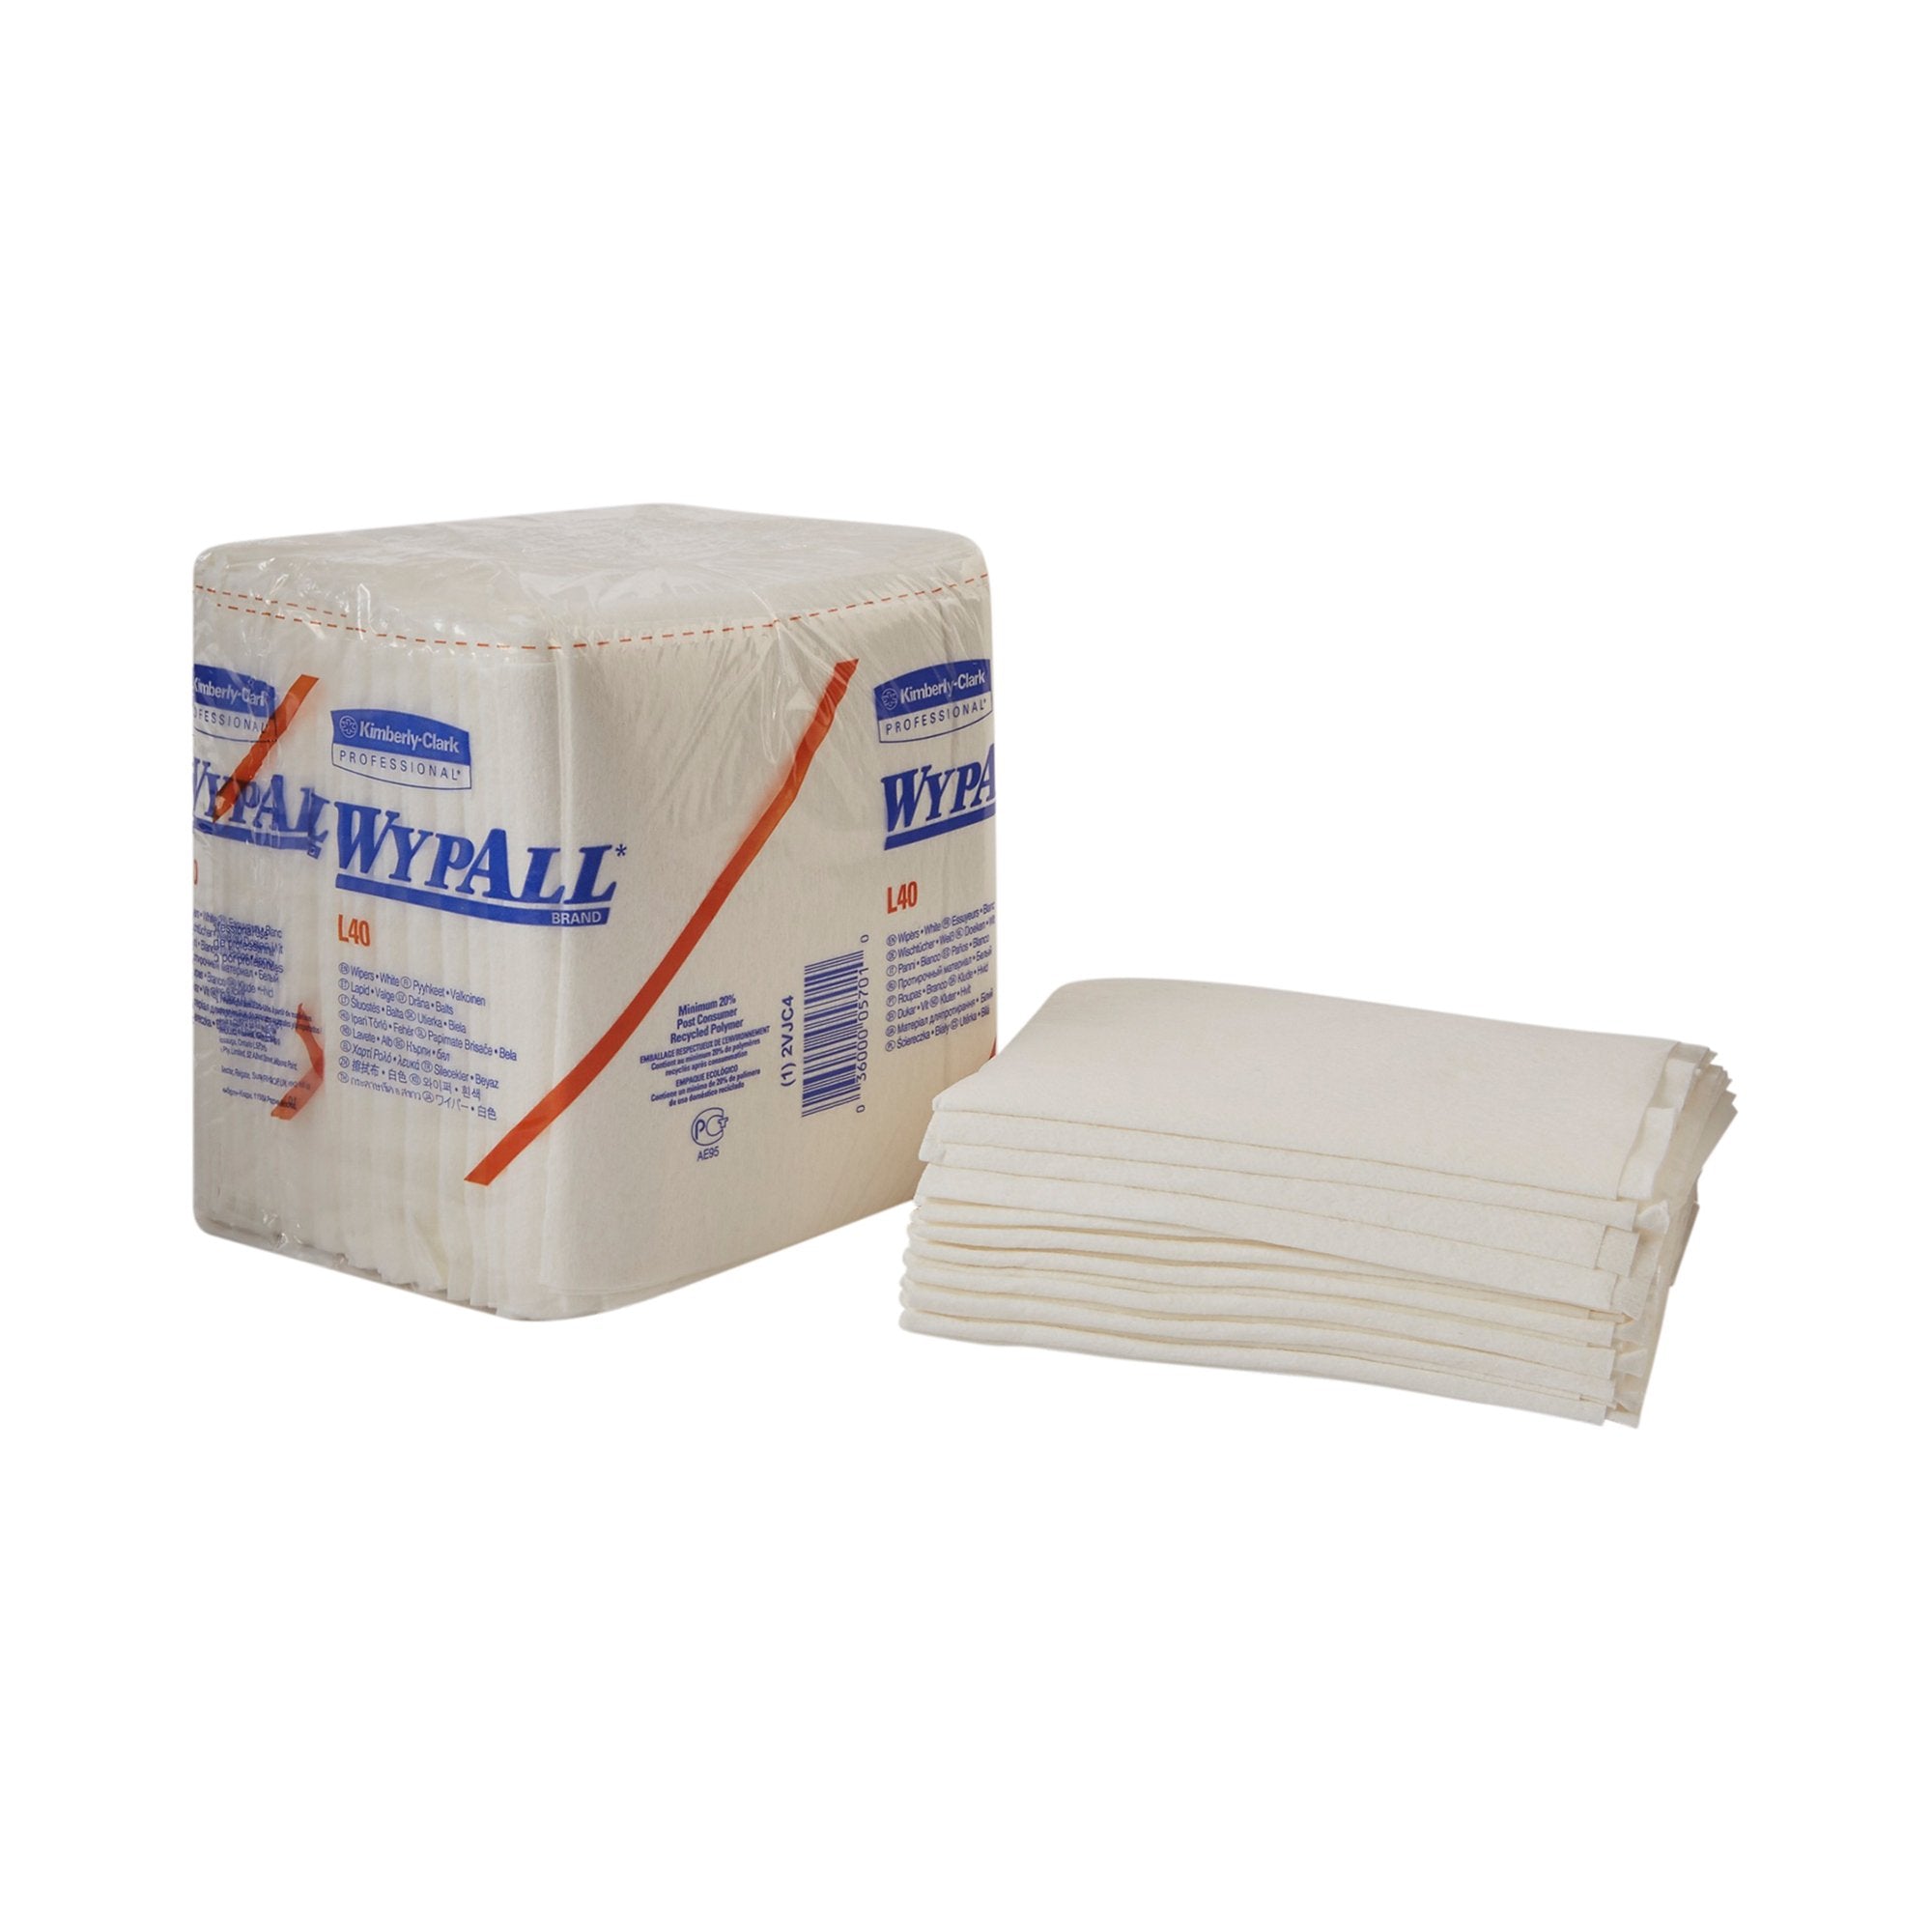 Task Wipe WypAll L40 Light Duty White NonSterile Double Re-Creped 12 X 12-1/2 Inch Disposable